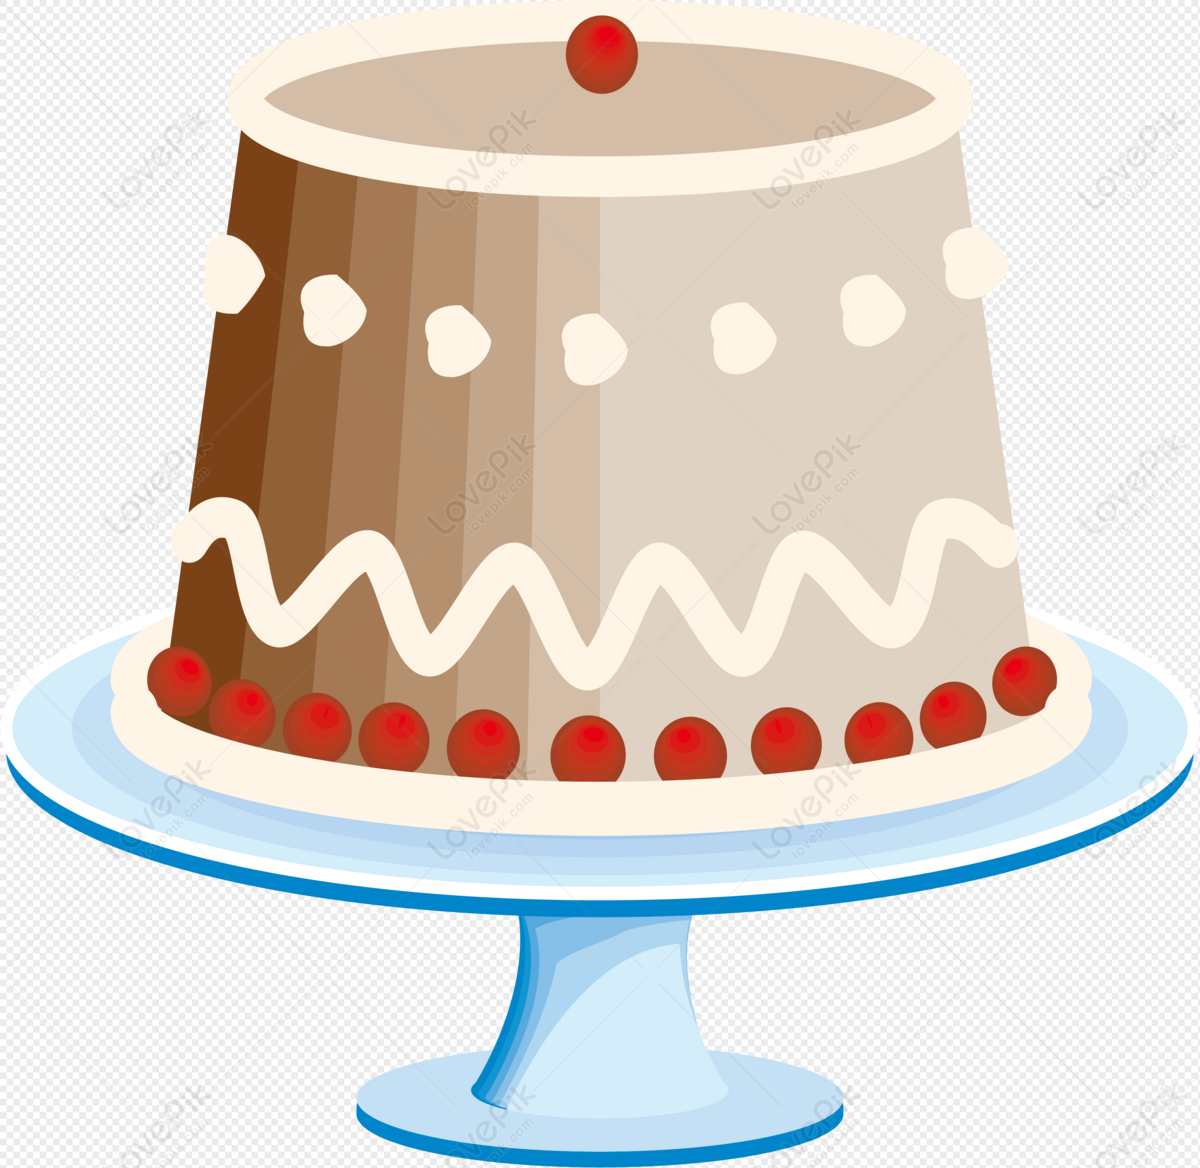 Cartoon Cherry Tray Cake PNG Hd Transparent Image And Clipart Image For  Free Download - Lovepik | 401152034